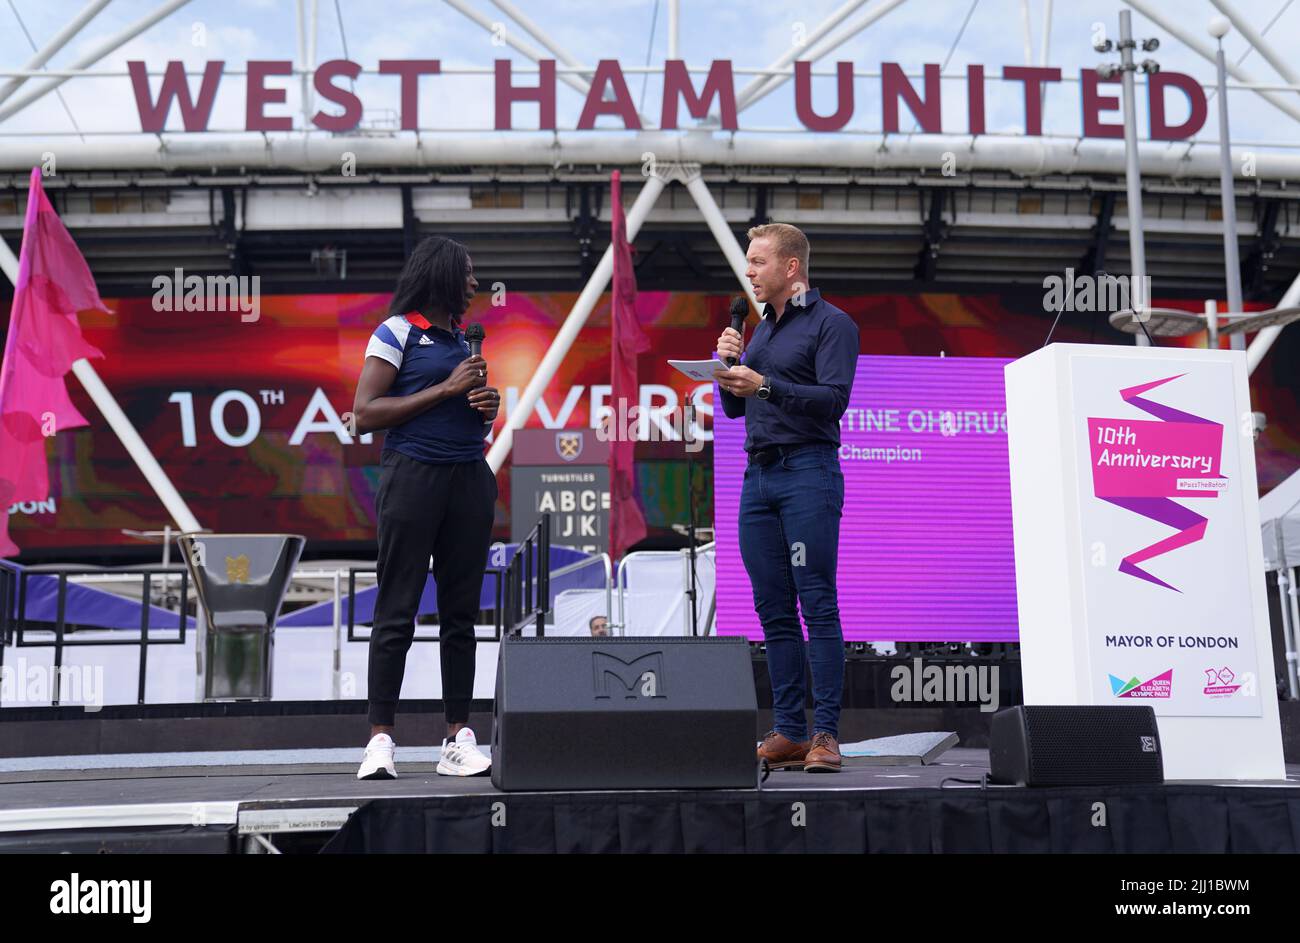 Olympic gold medallists Christine Ohuruogu and Sir Chris Hoy during the London 2012 Olympics 10th Anniversary Event held at Bridge One at the Queen Elizabeth Olympic Park, London. Wednesday July 27 will mark exactly 10 years since the opening ceremony of the 2012 London Olympics Games. Picture date: Friday July 22, 2022. Stock Photo